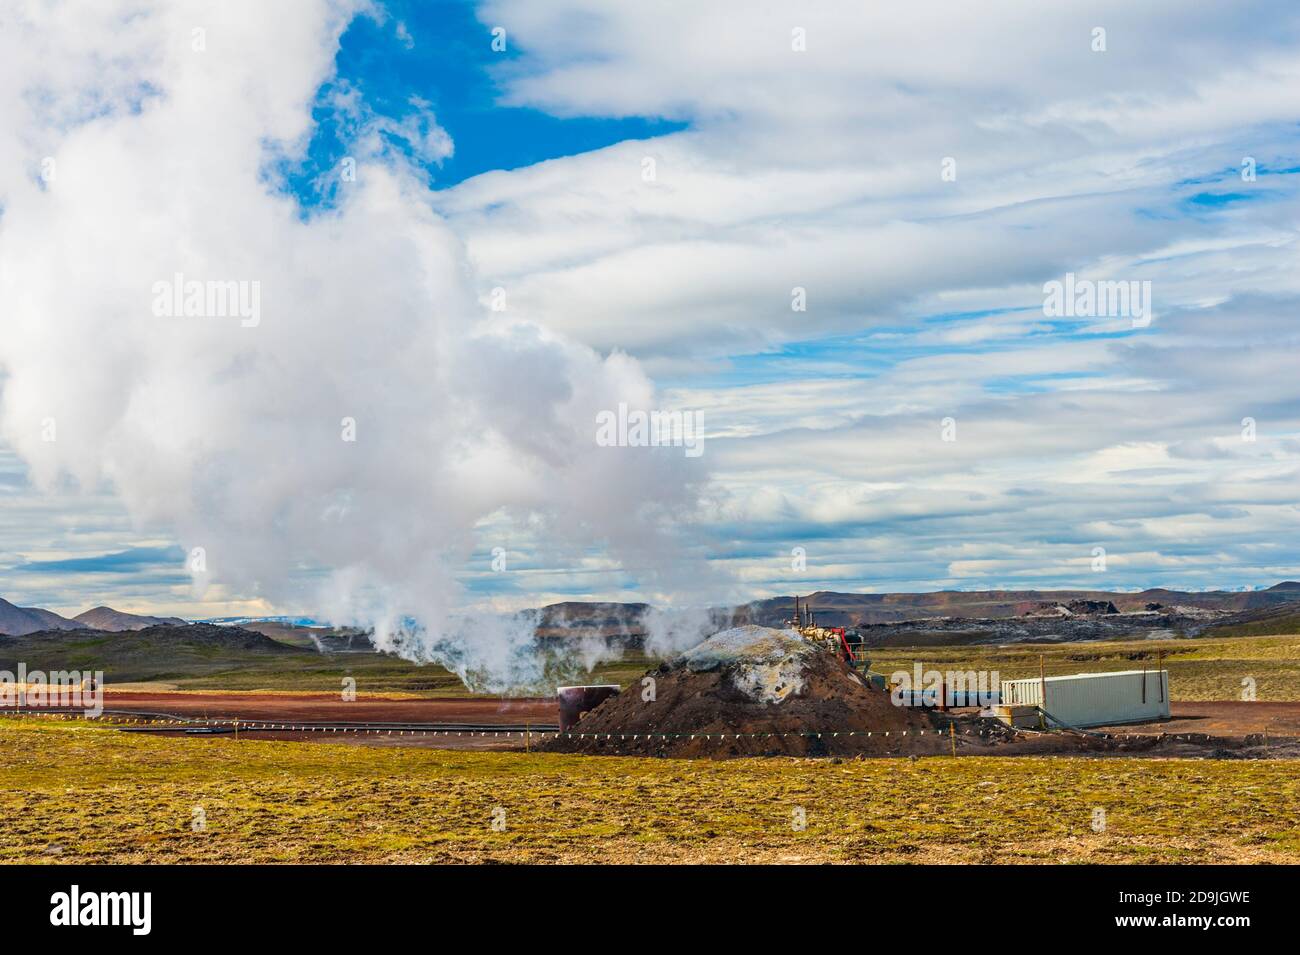 Deep magma well created in Iceland deep drilling project to study geothermal energy production in Iceland. Krafla volcano, Iceland Stock Photo